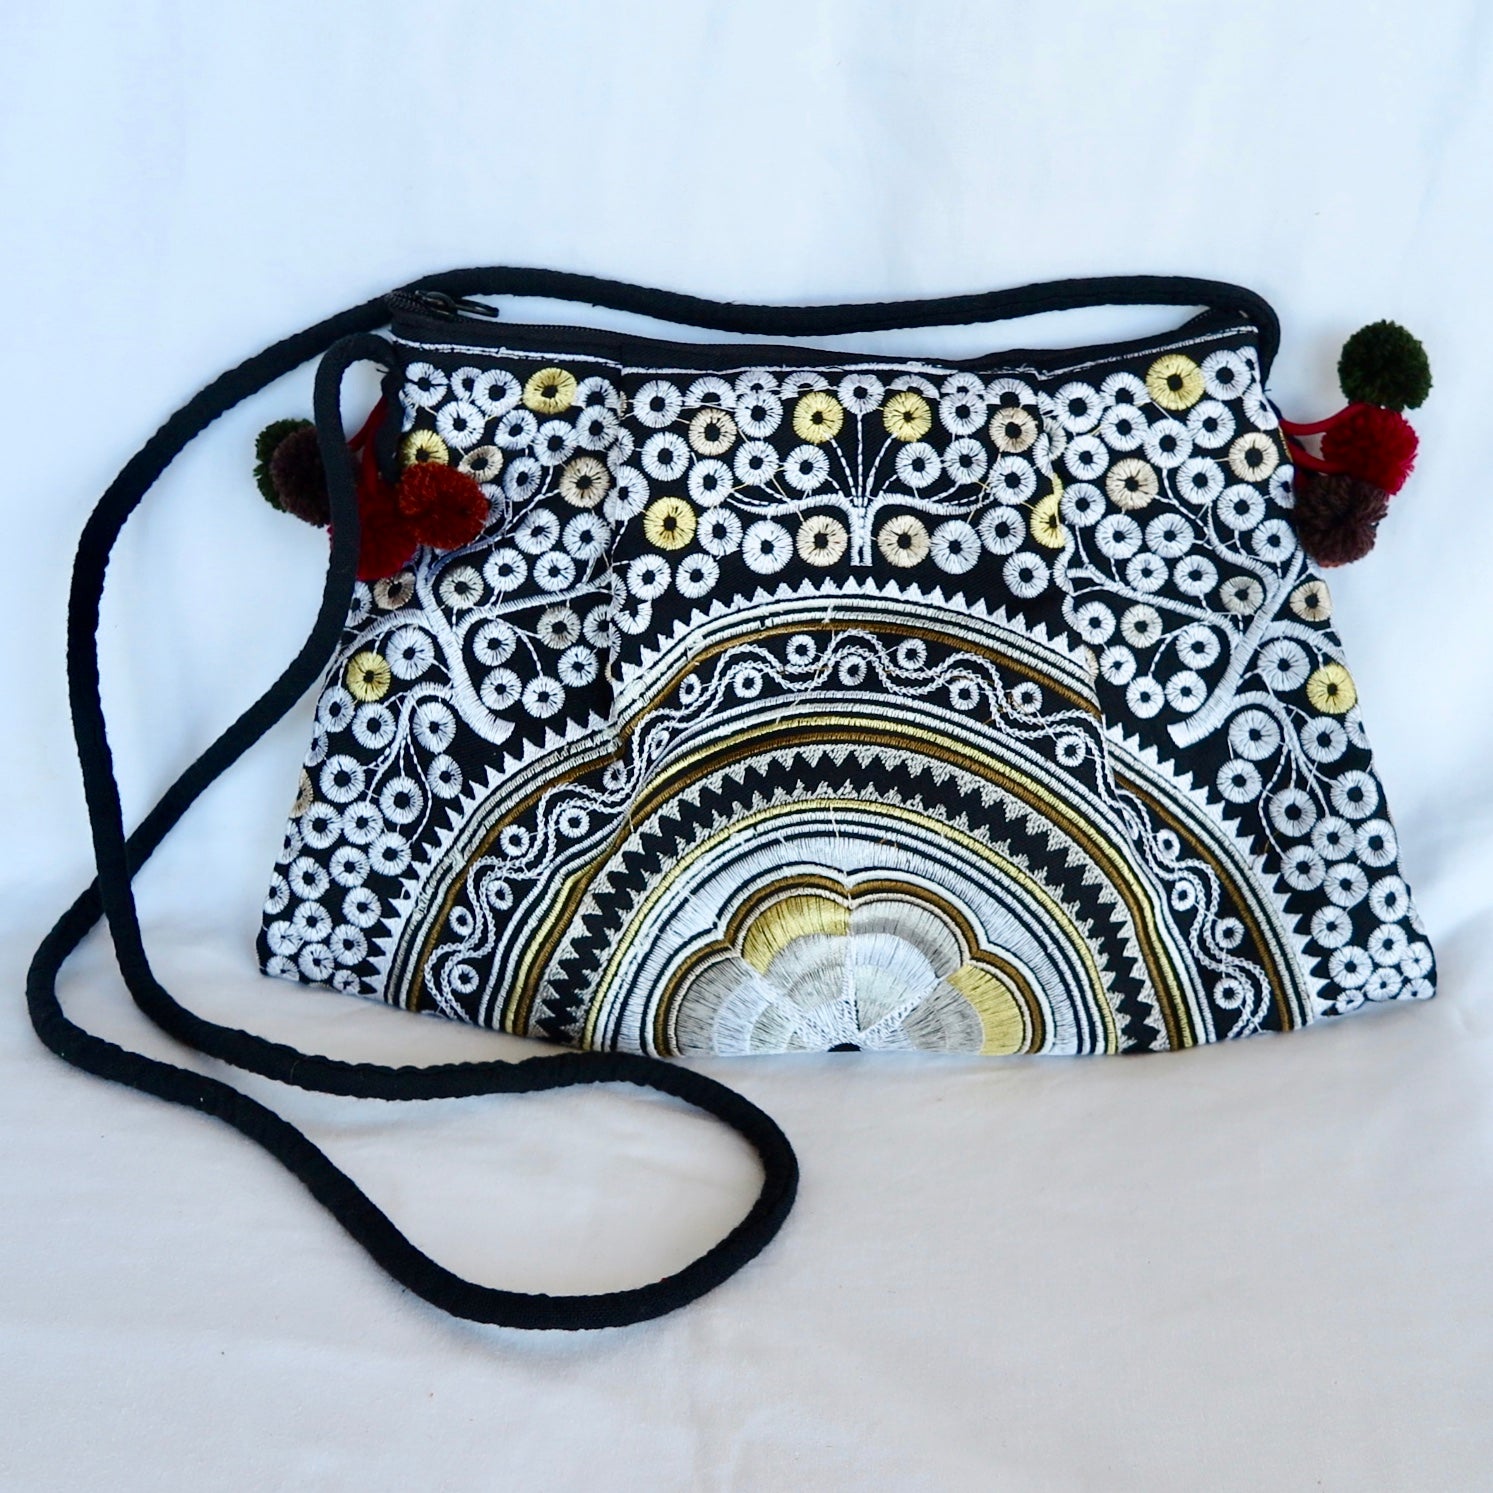 Hmong Black and Gold Exotica, Cross Body Bag - Nomad Designs Online